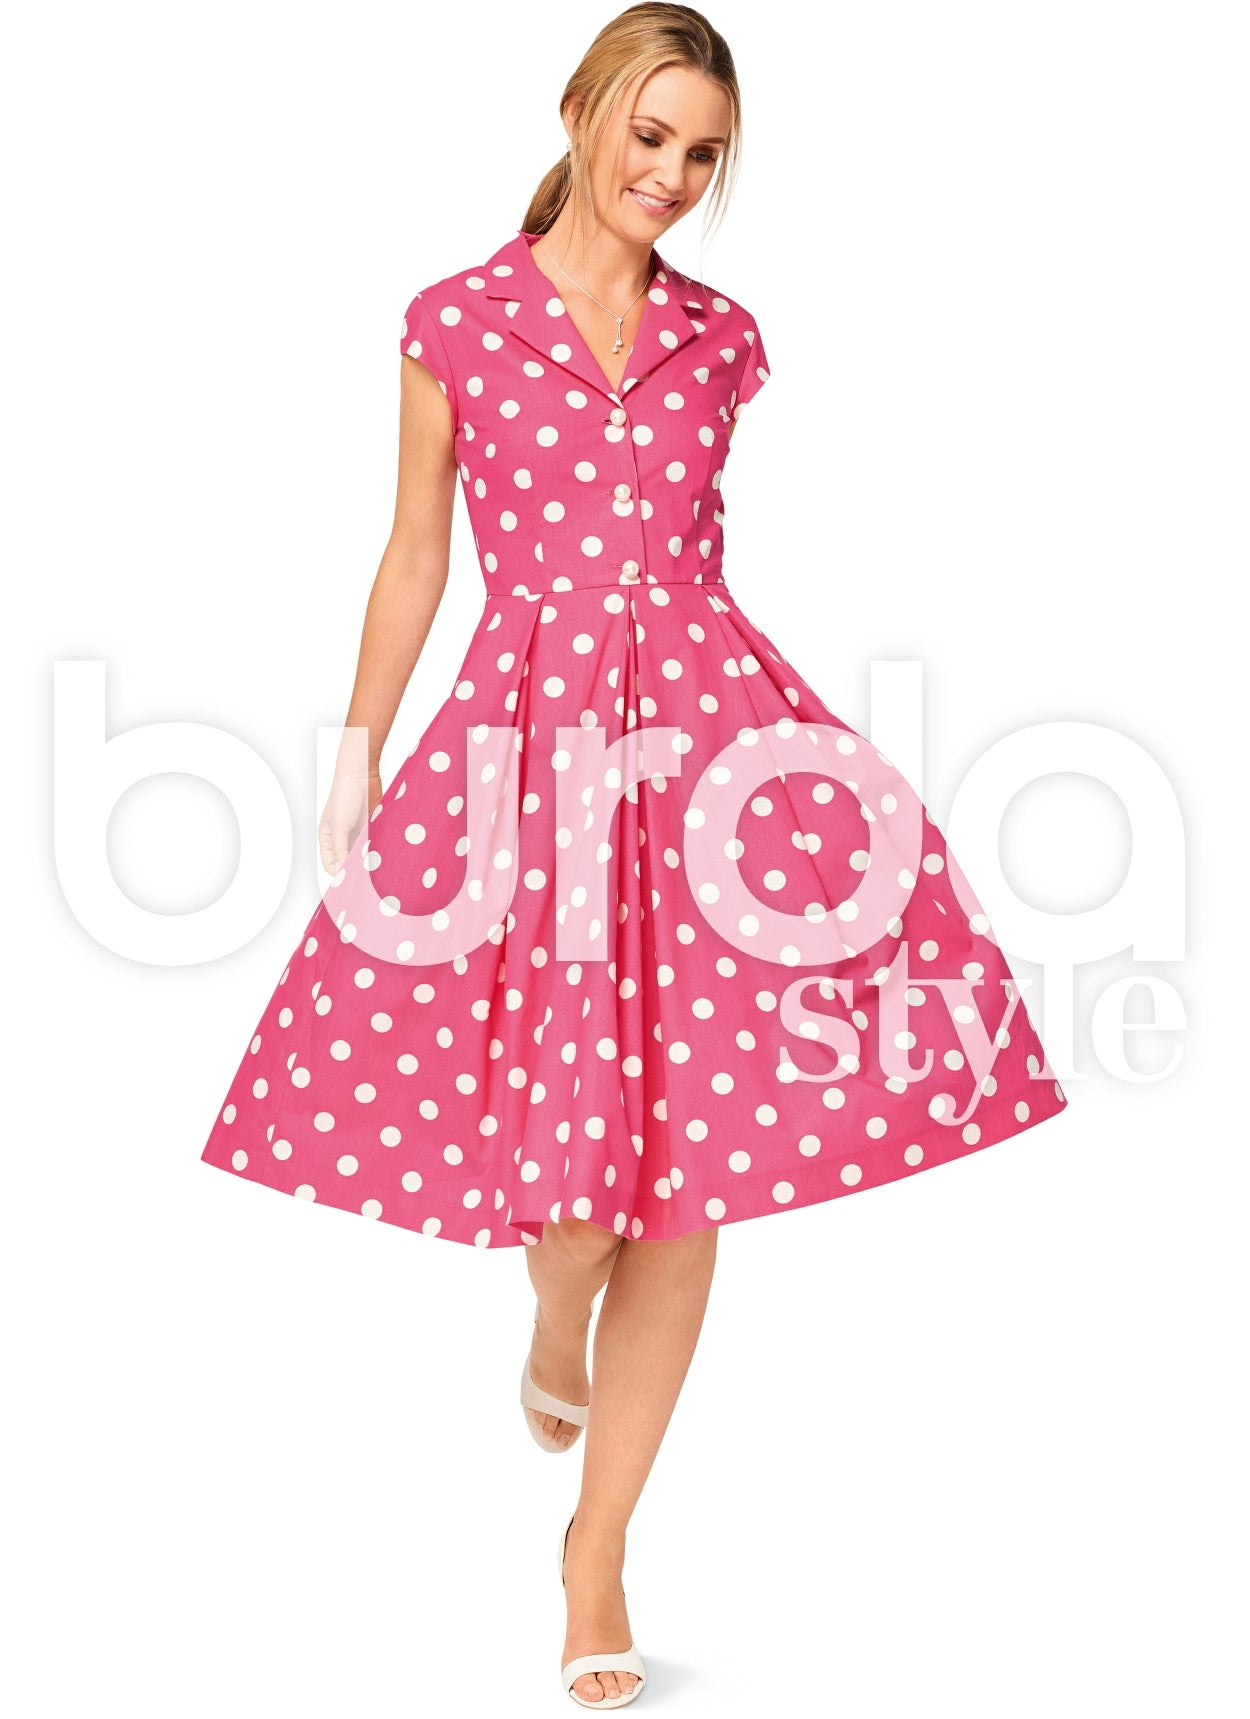 Burda 6520 Misses’ Dress, Blouse and Skirt pattern from Jaycotts Sewing Supplies